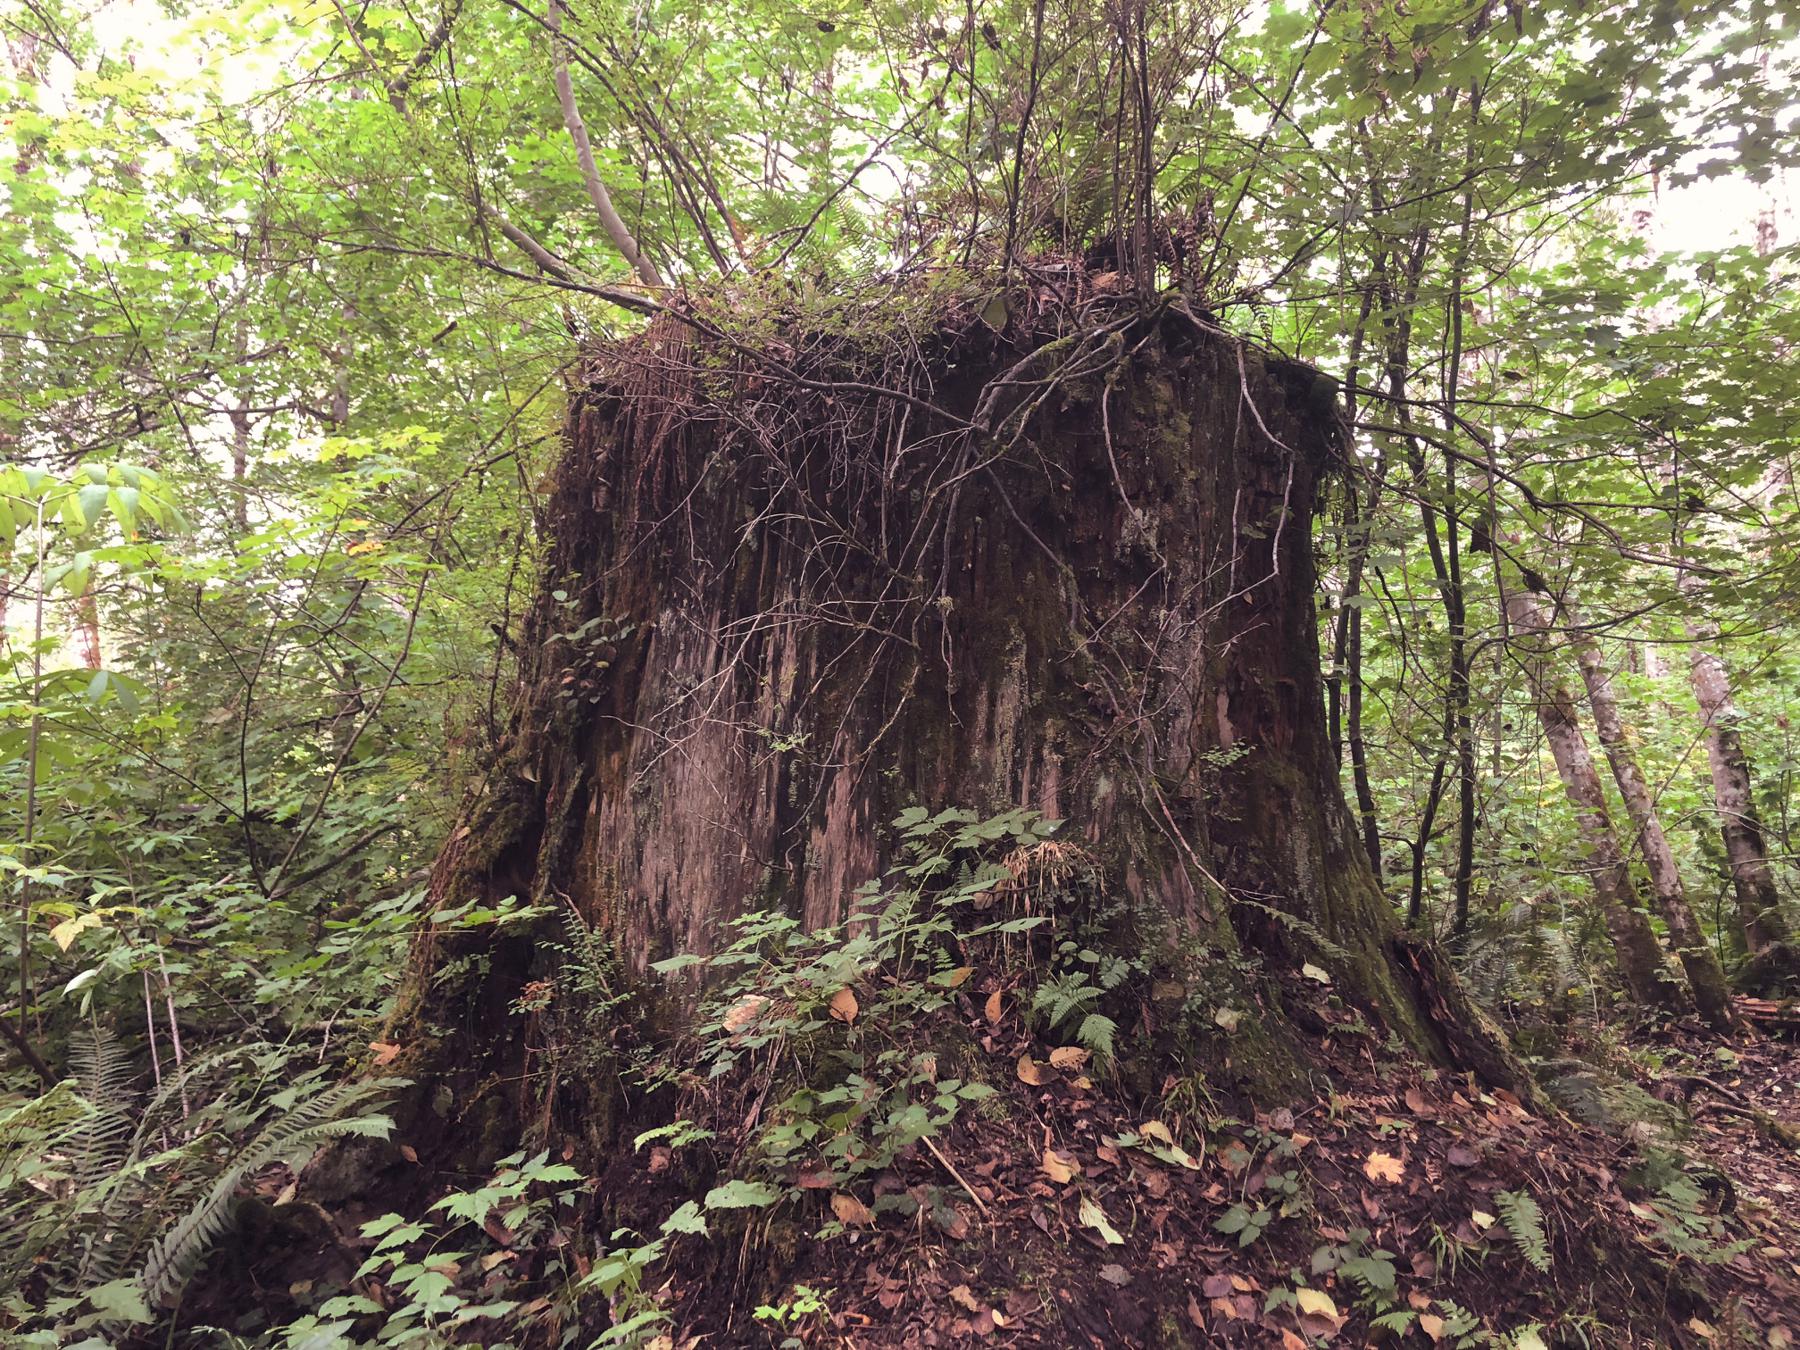 Old stump with stump sprouts